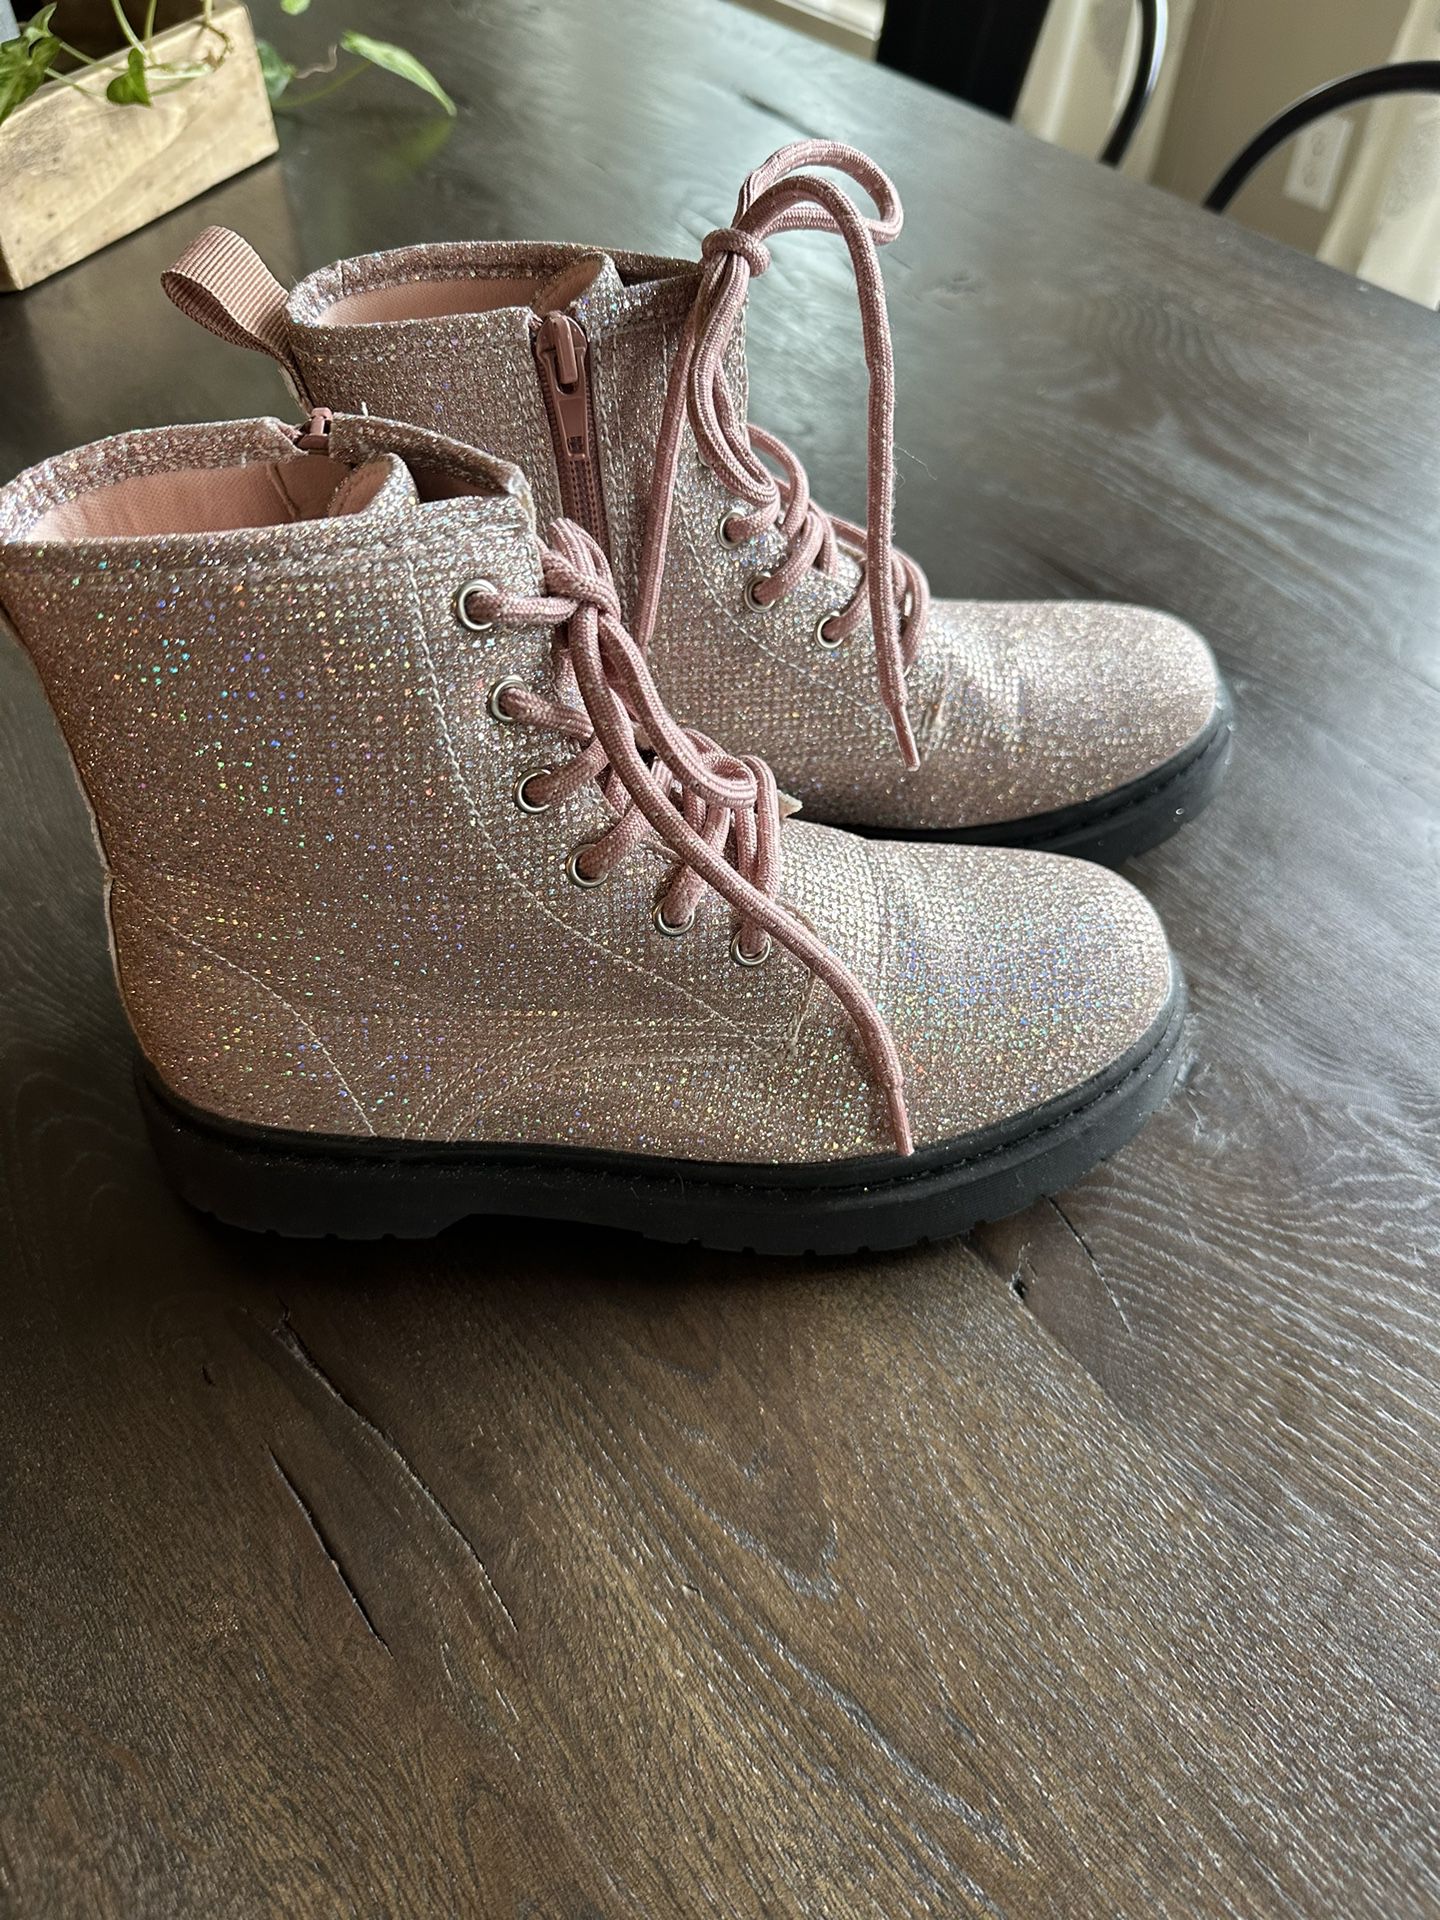 Excellent Condition Girls Boots - Size 4